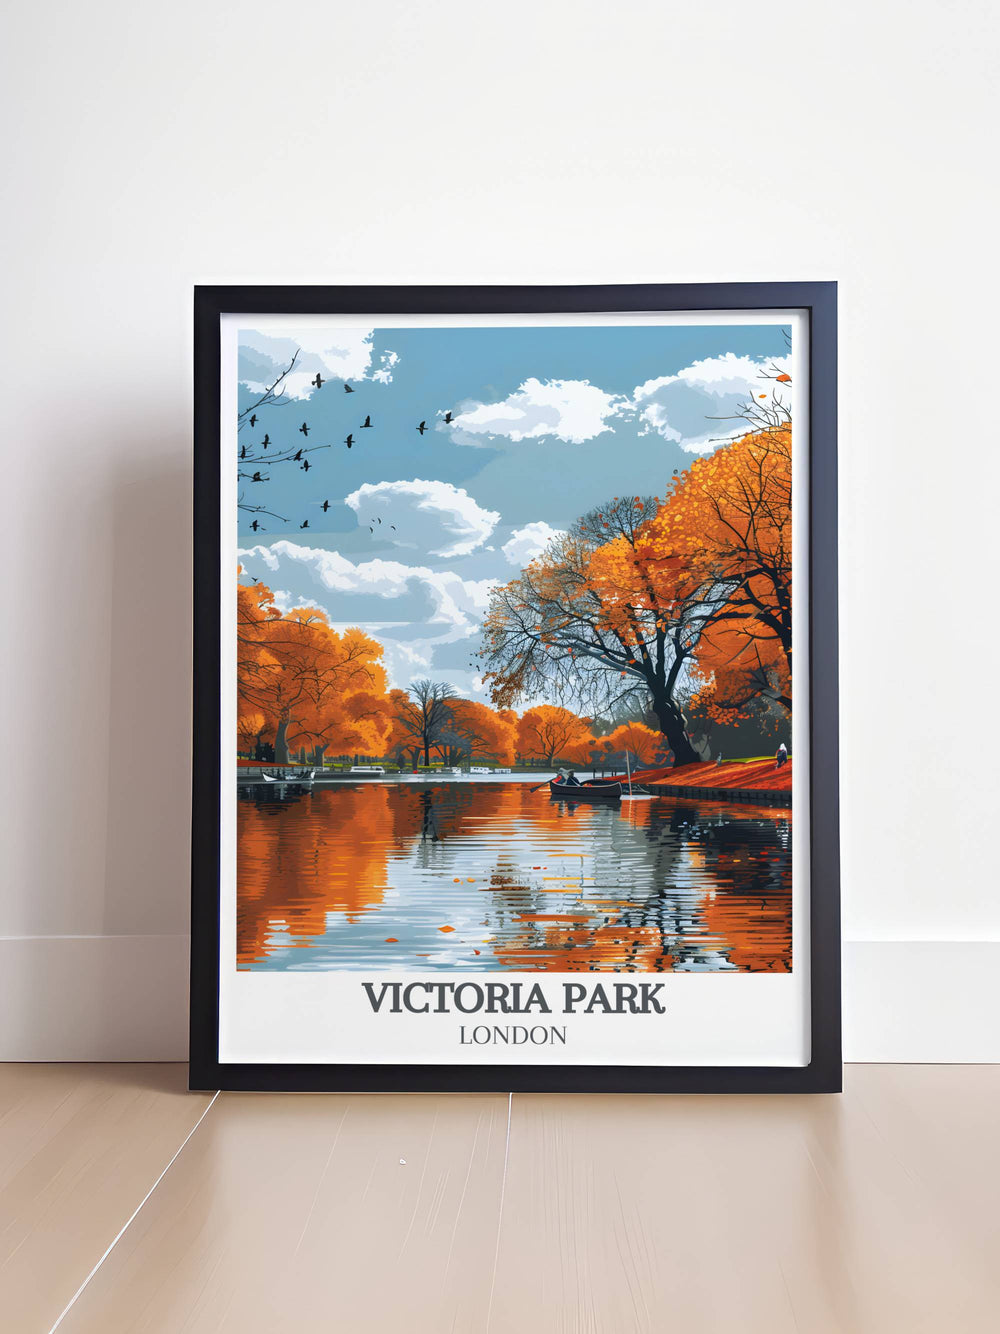 The Boating Lake travel poster featuring calm waters and historic boats reflecting lush greenery perfect for creating a tranquil atmosphere in any room.